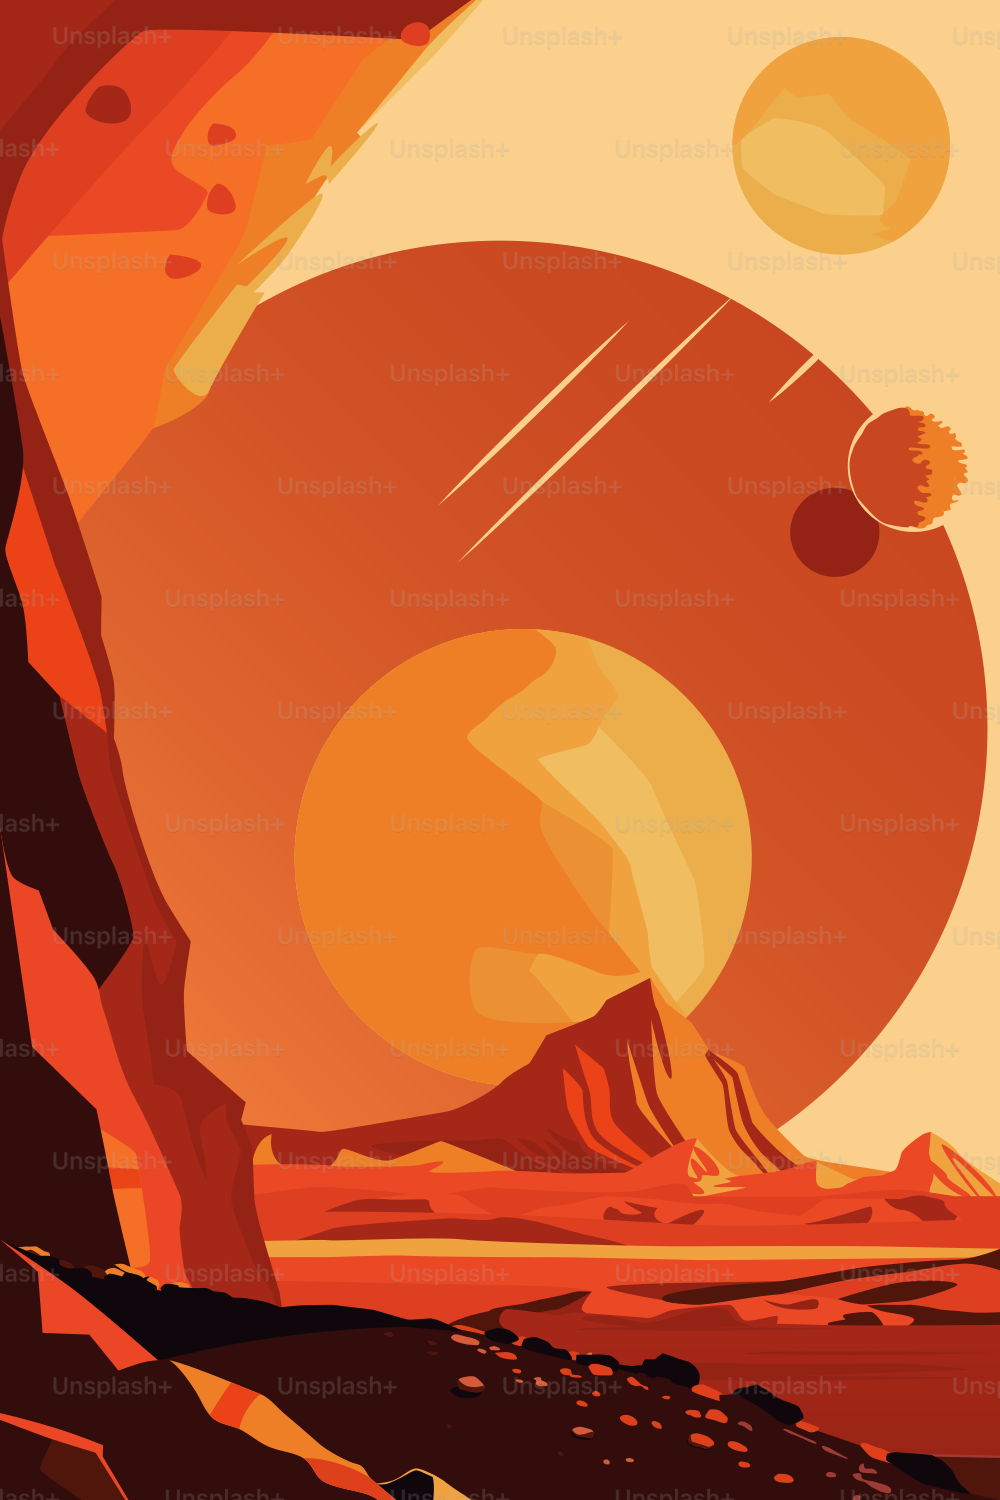 Human Space Colonisation Poster. Surface of Unknown Planet.